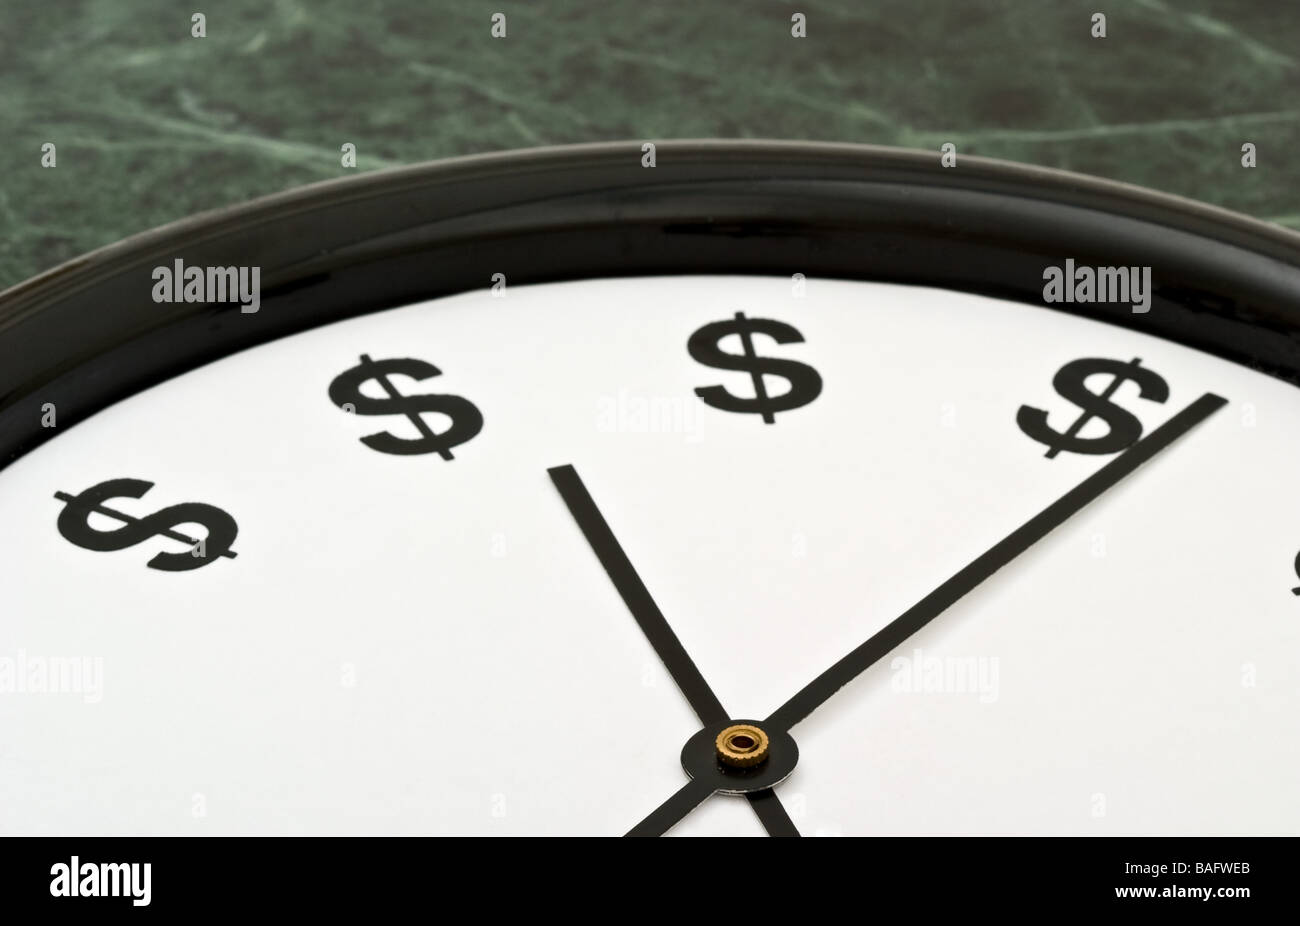 White clock with the hands pointing towards dollar signs Stock Photo